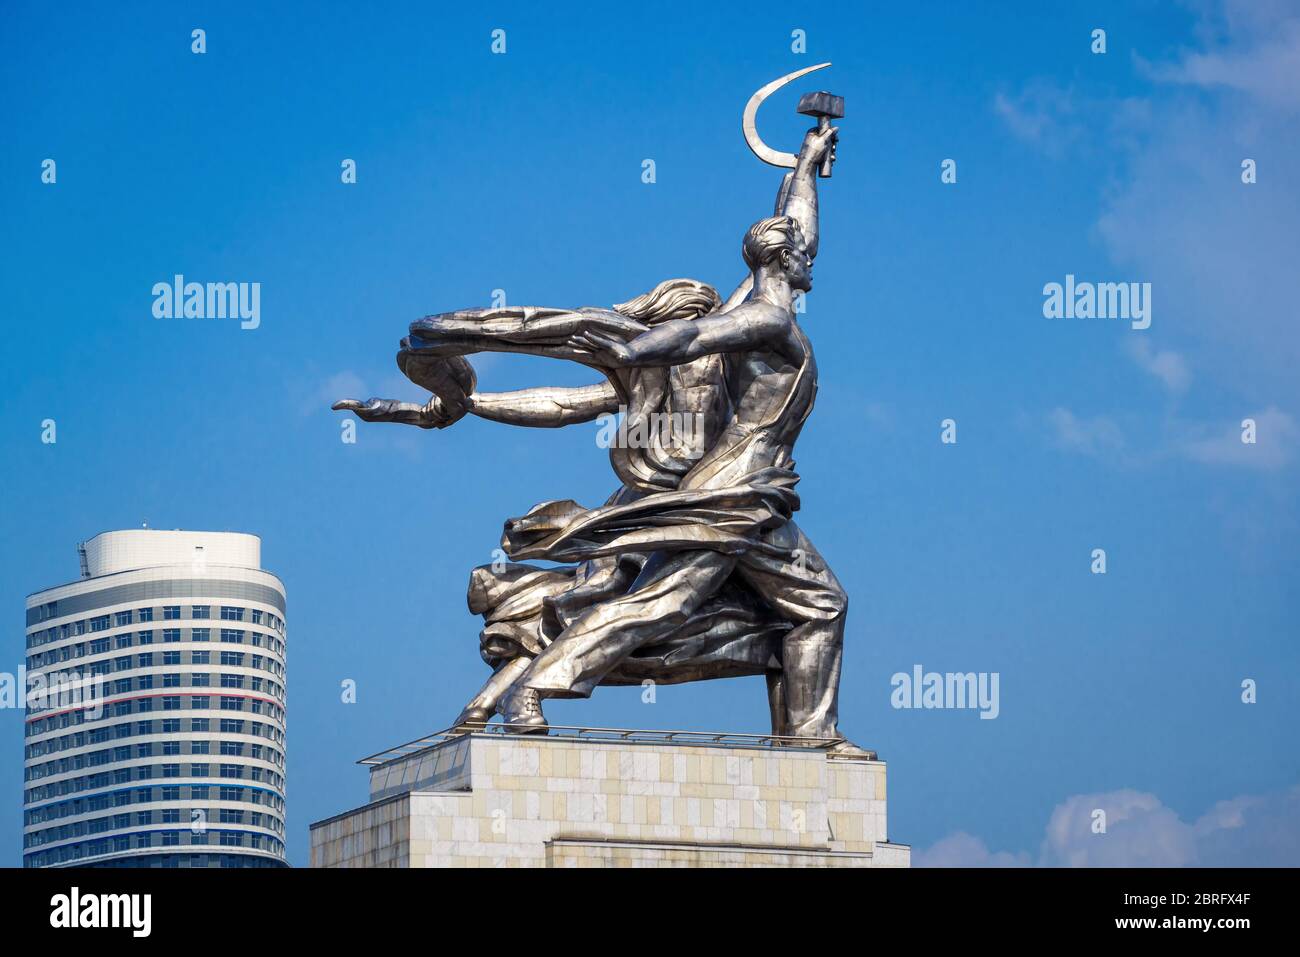 Famous soviet monument Worker and Kolkhoz Woman (Worker and Collective Farmer) of sculptor Vera Mukhina. Made of stainless ste Stock Photo